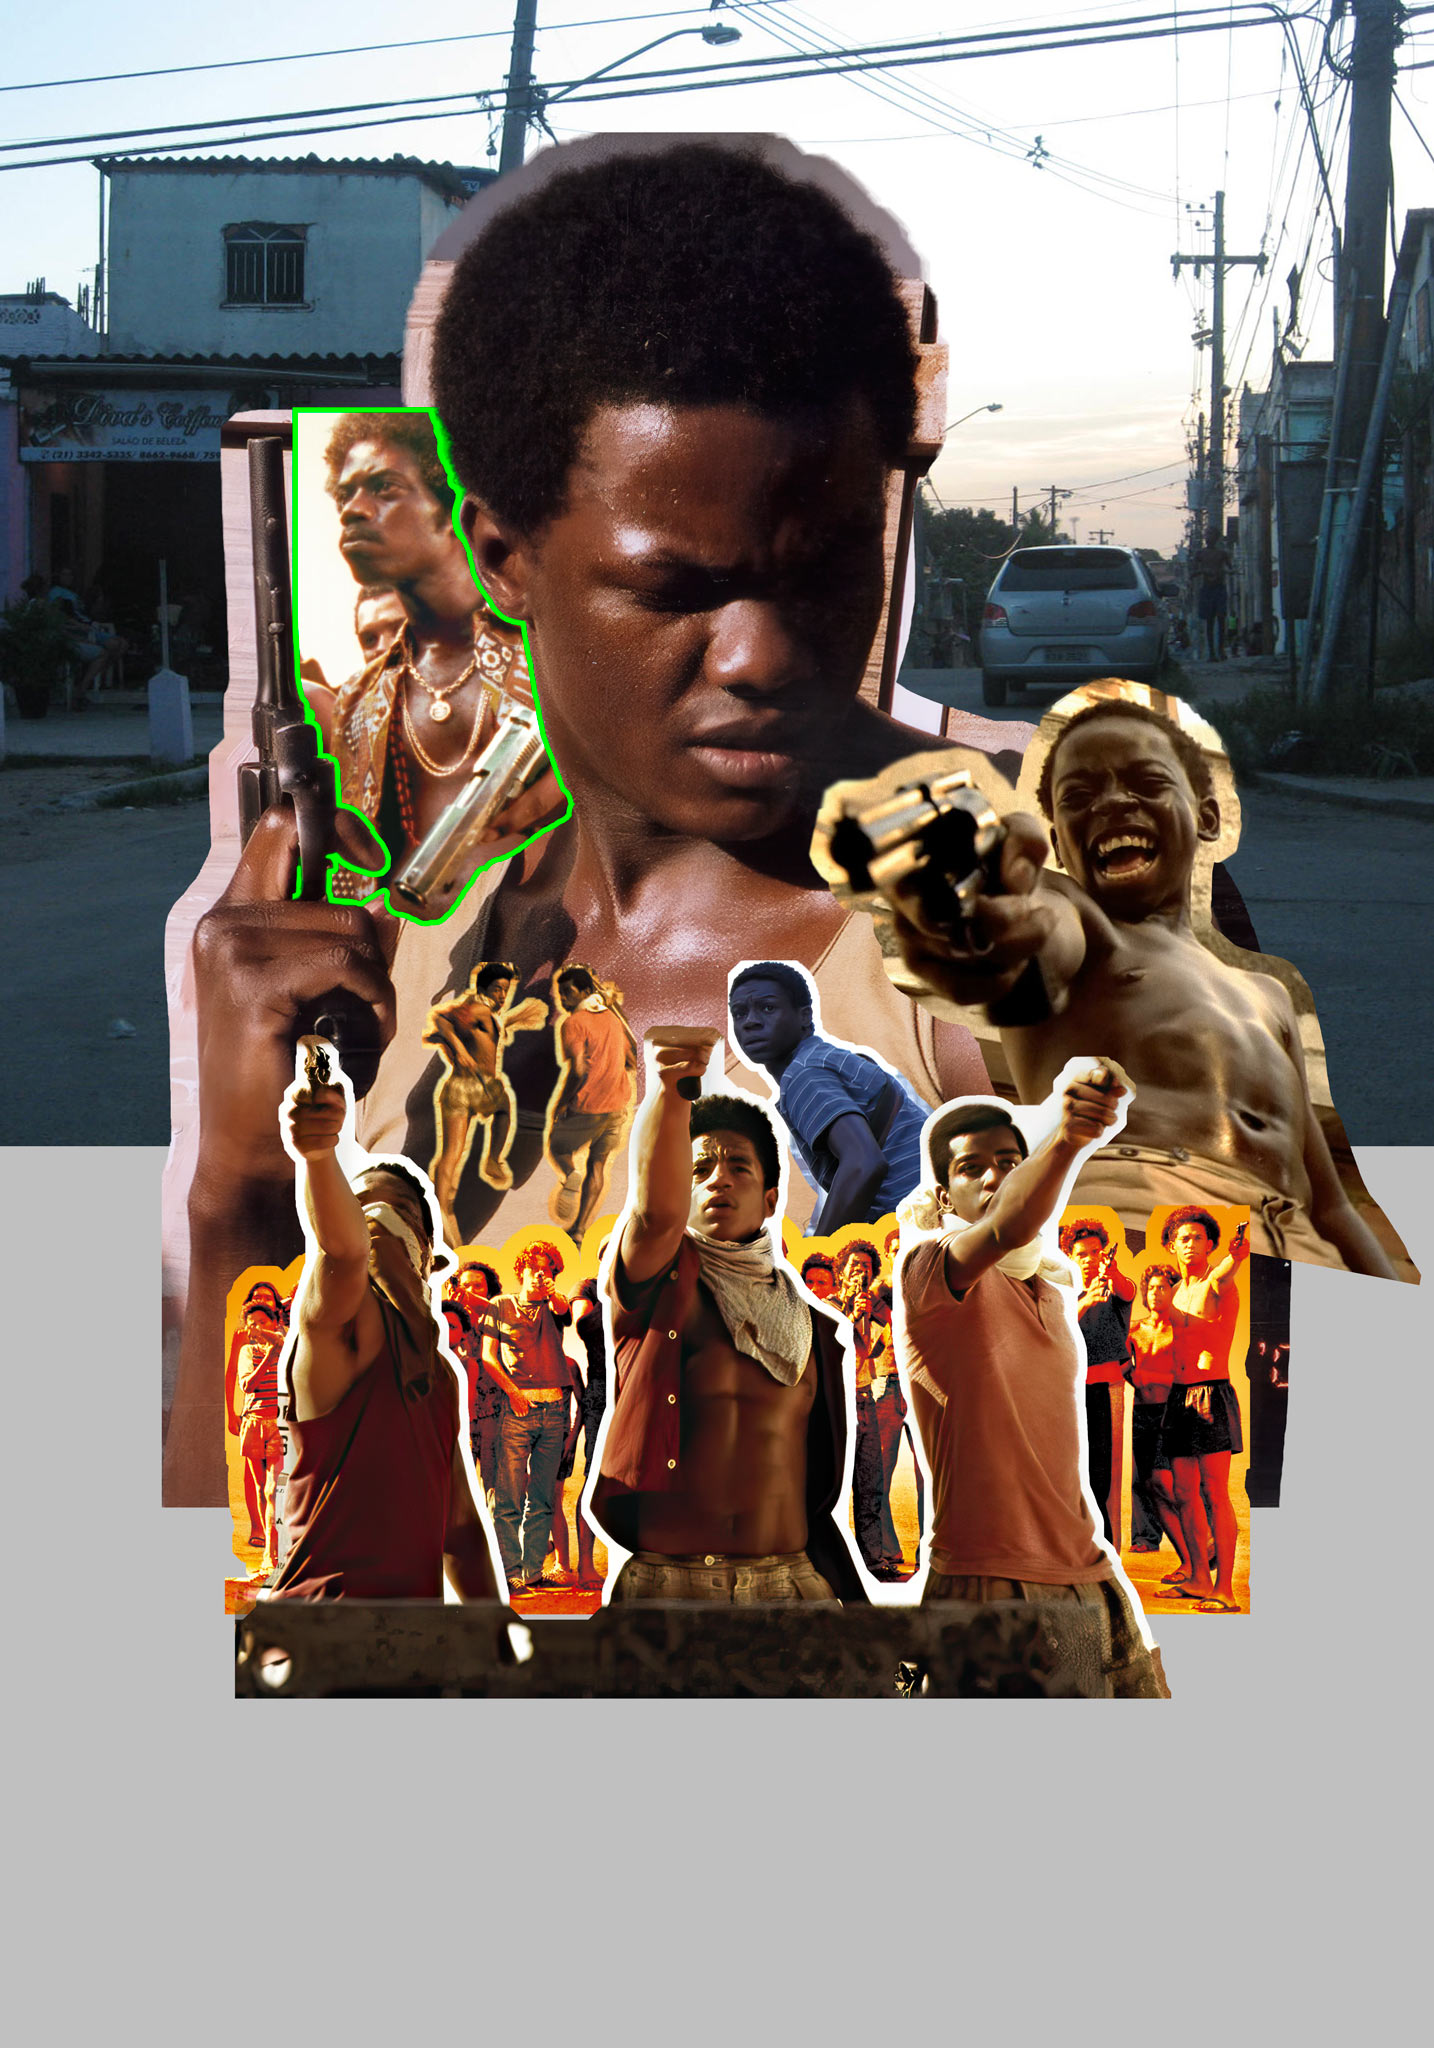 City of God (2002) before